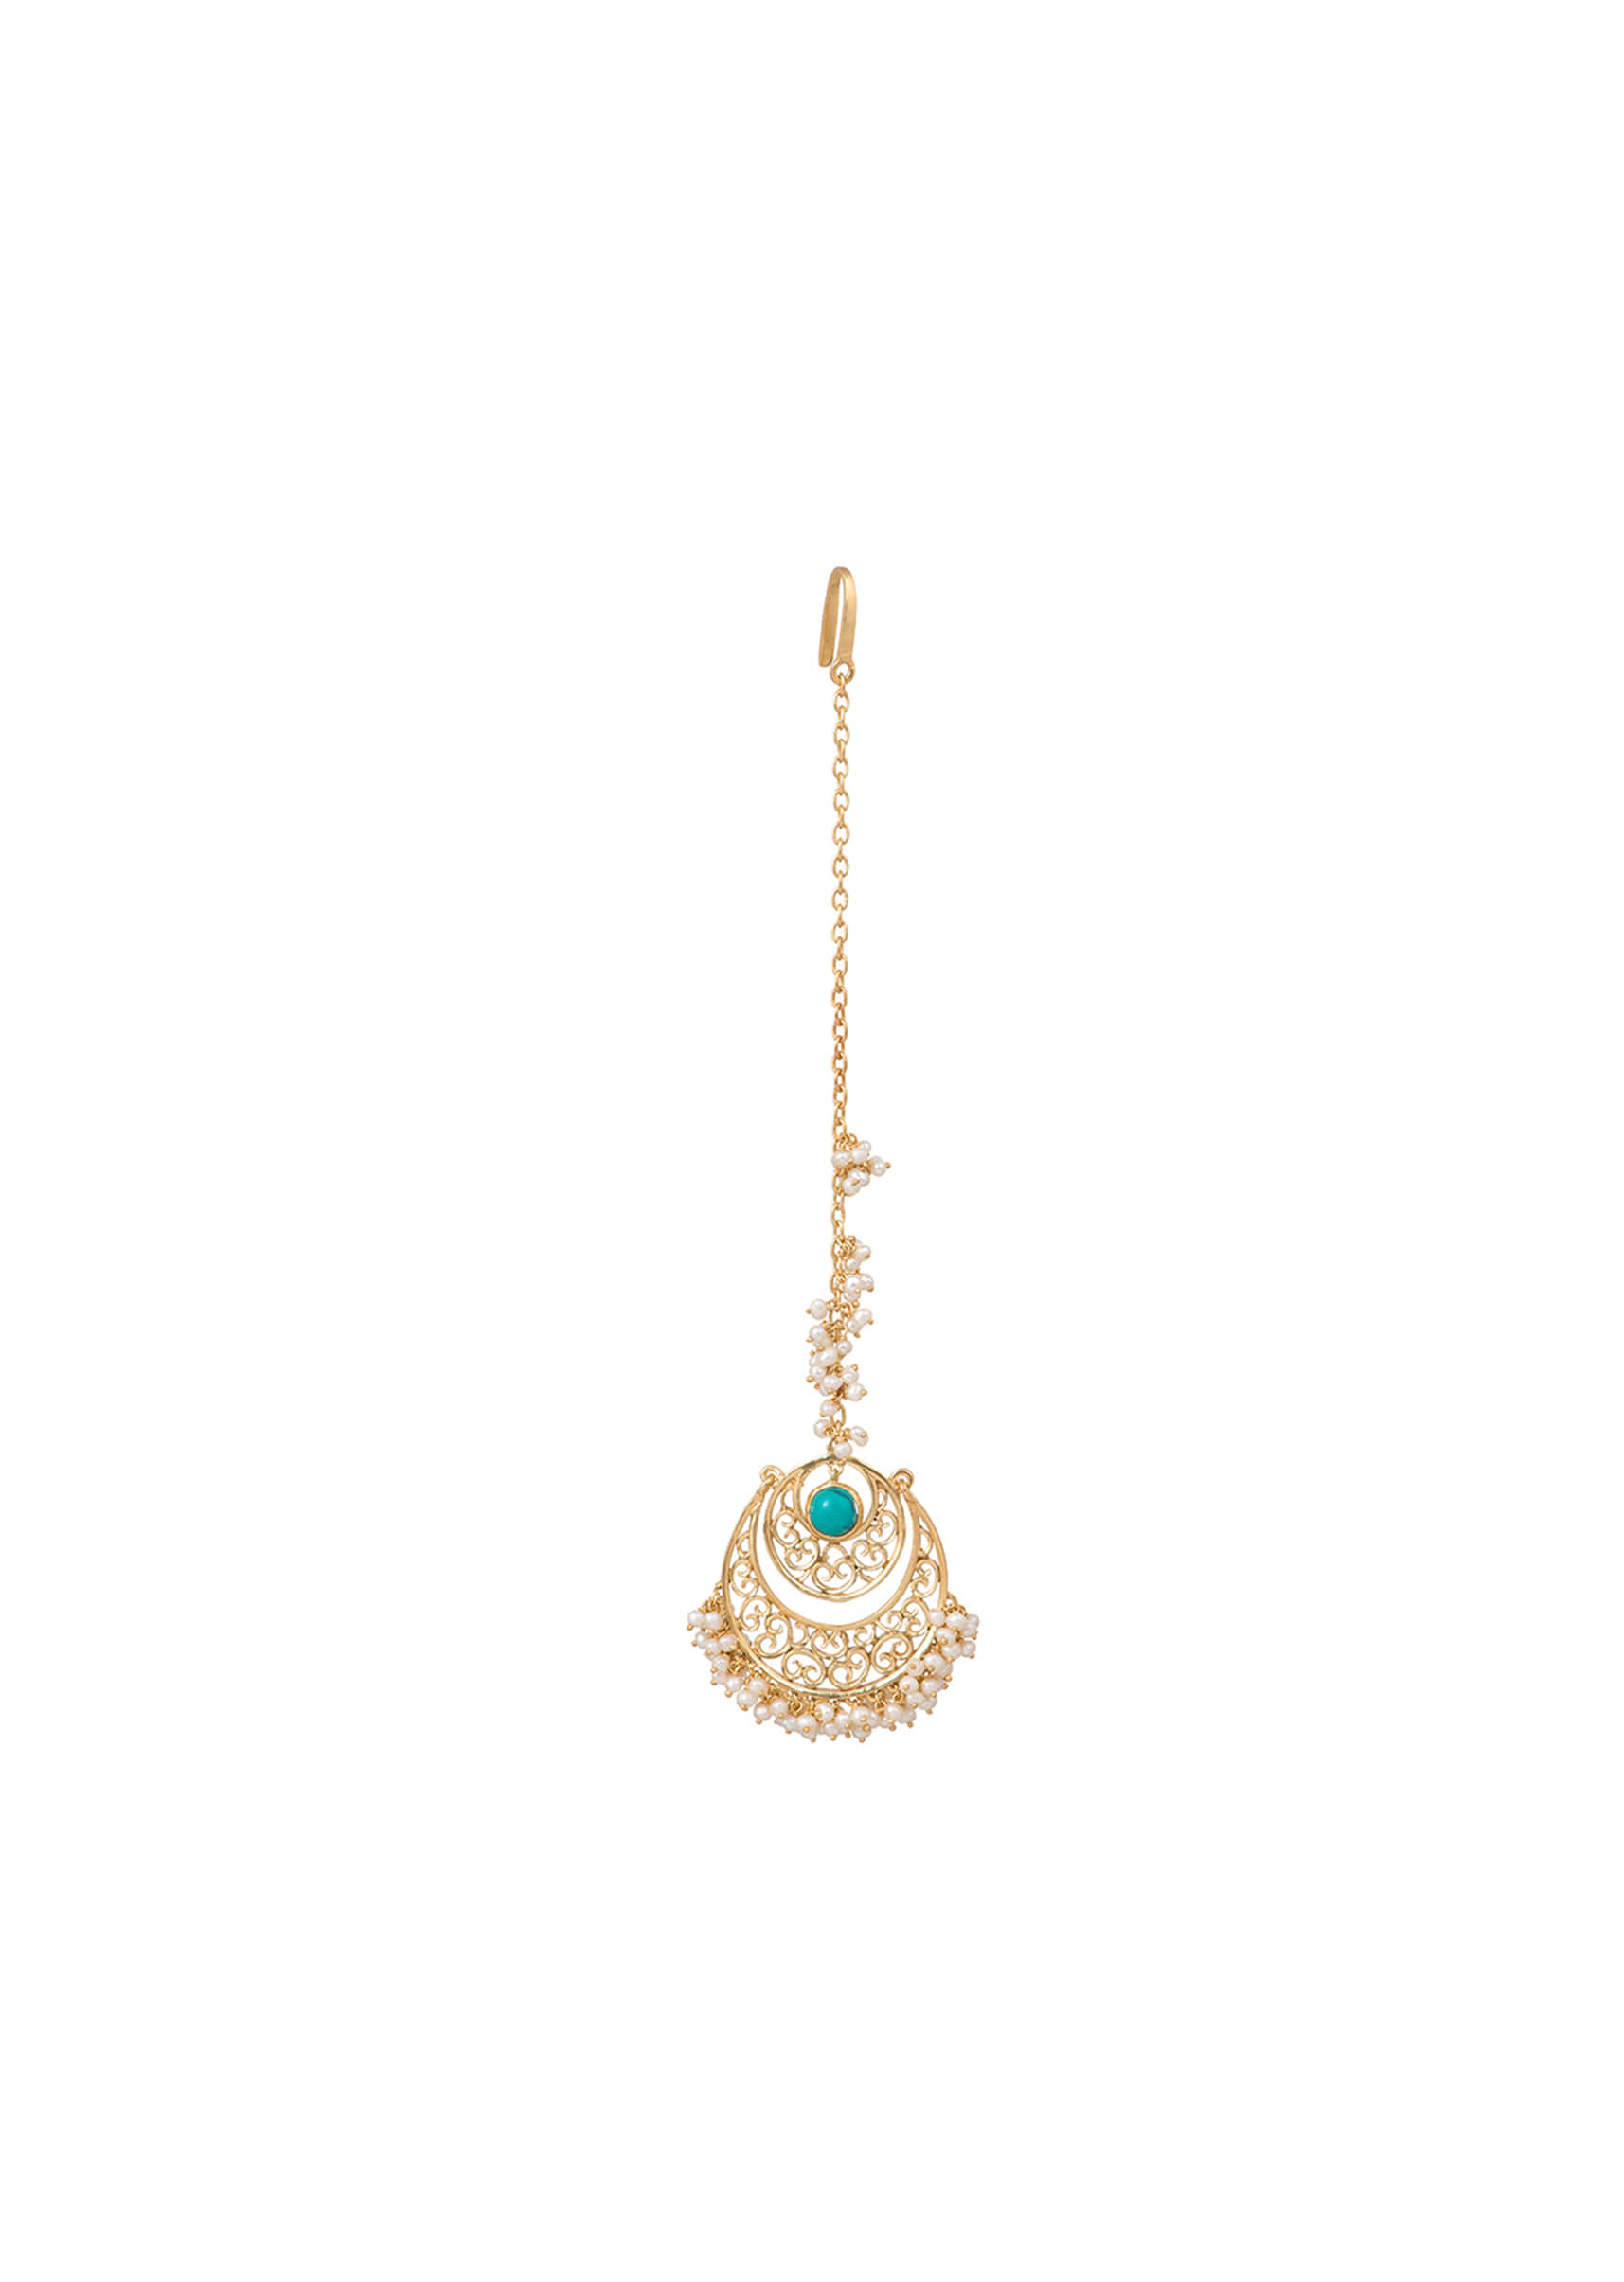 Gold Plated Maang Tika With Turquoise Stone Along With Carved Filigree Design And Pearls By Zariin